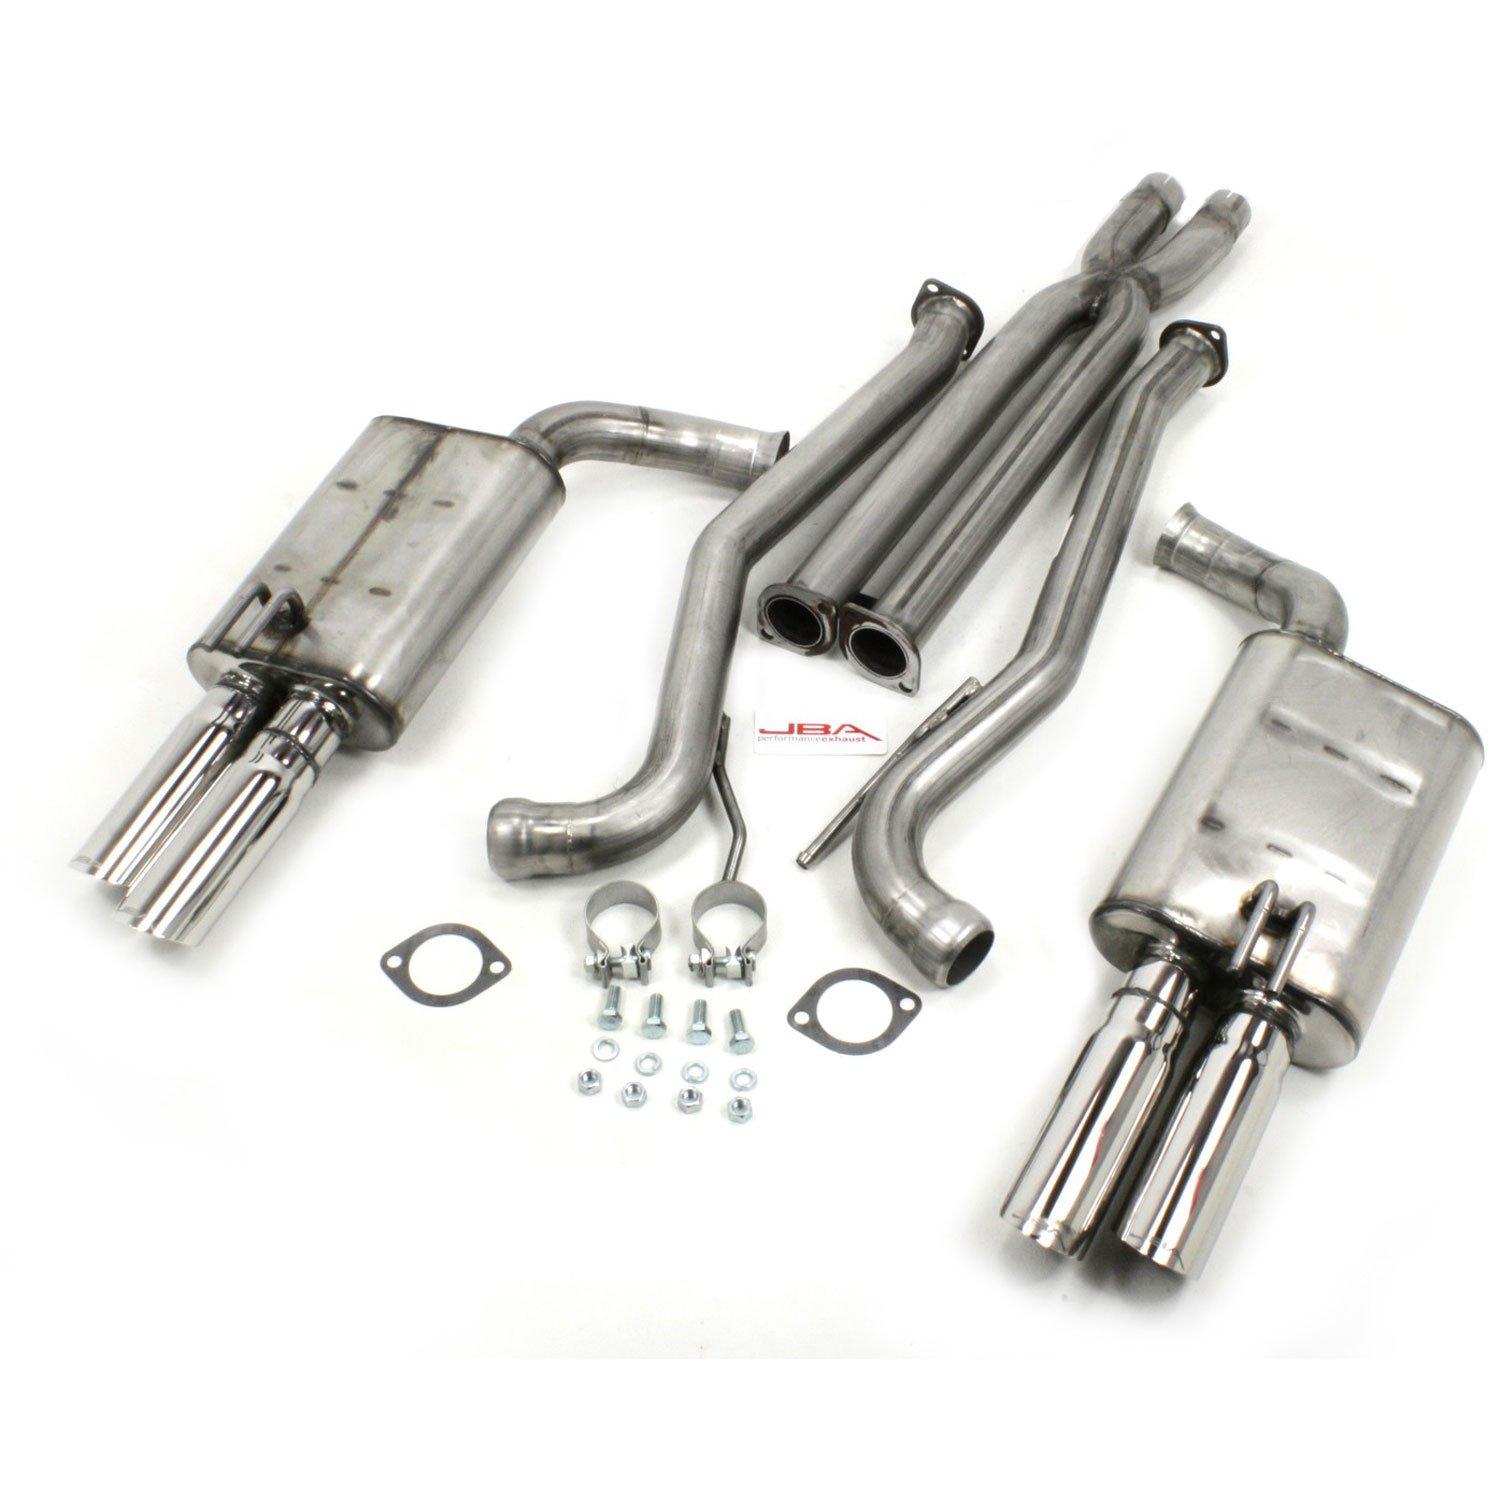 JBA Performance Exhaust 40-3118 2.5-3" Stainless Steel Exhaust System 2014 Chevy SS 3" Cat Back Exhaust